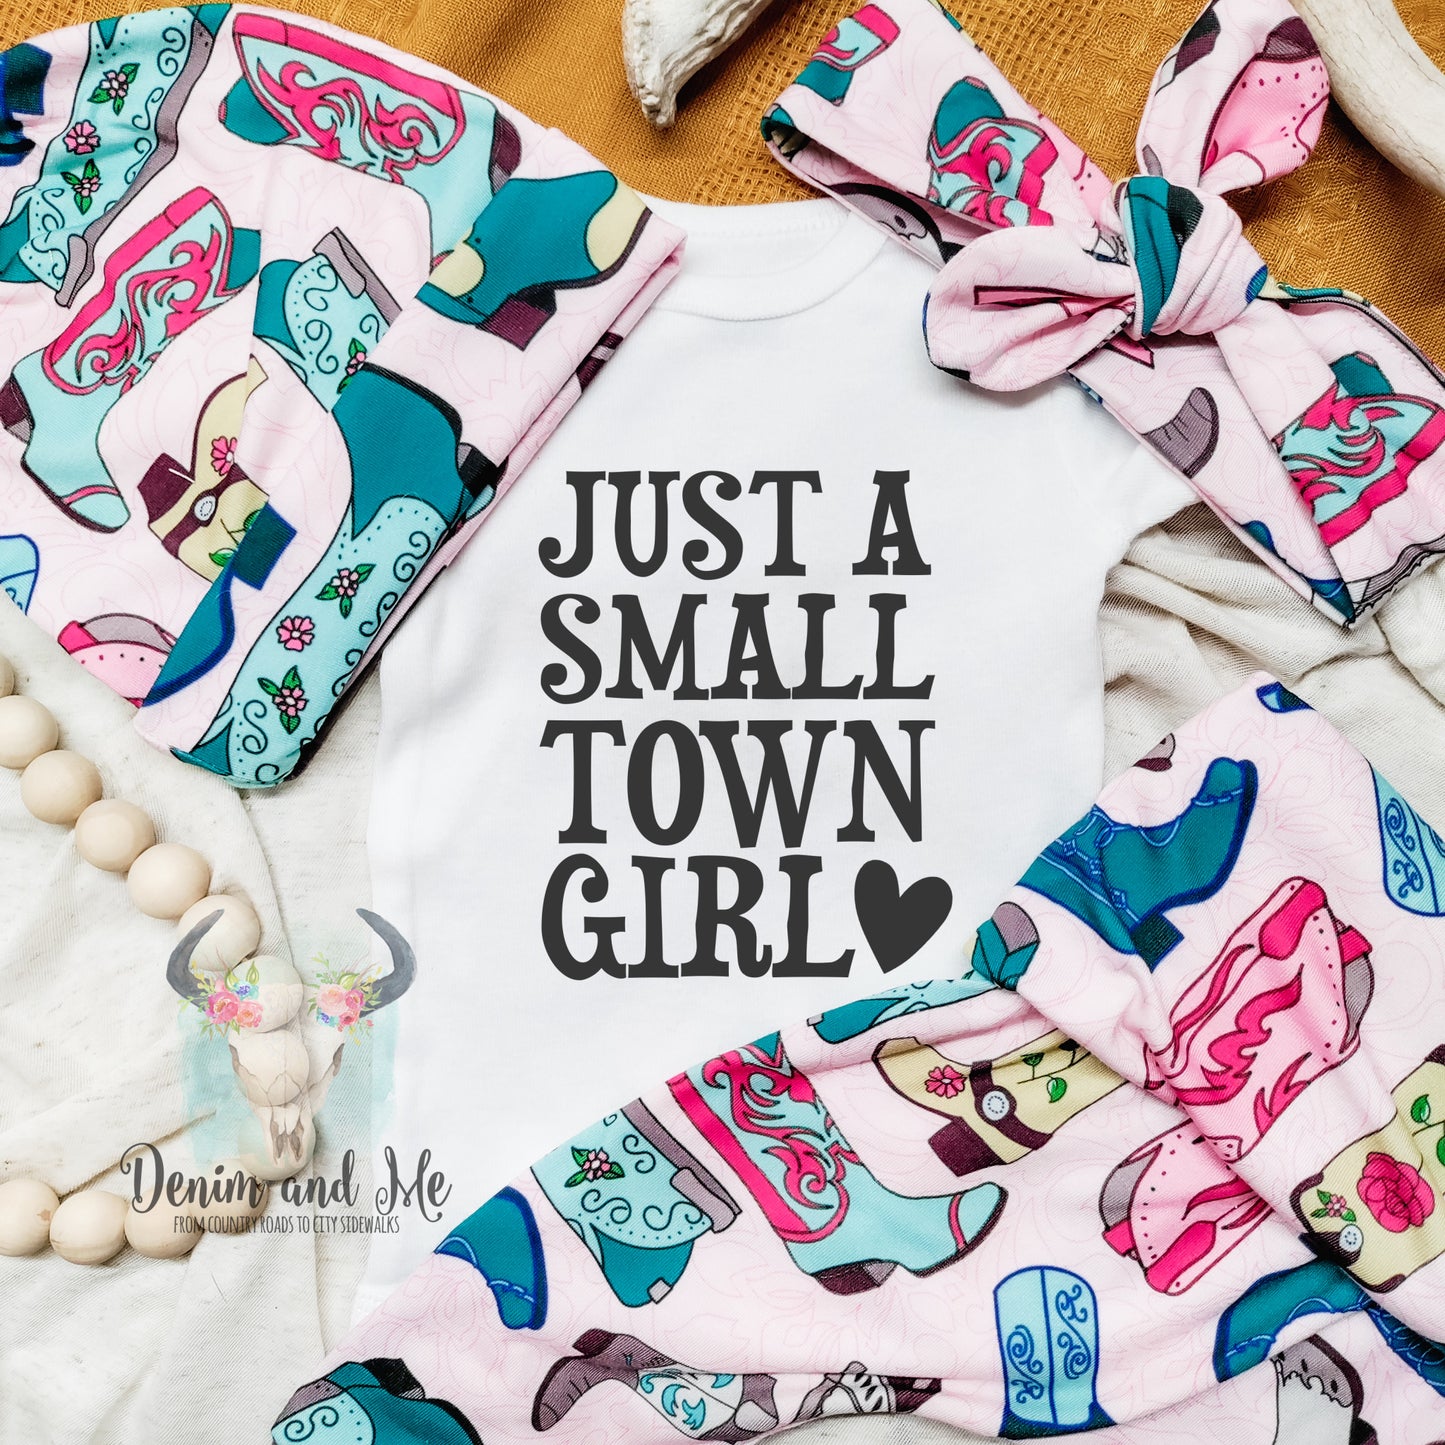 "Just A Small Town Girl" Cowgirl Boots Outfit